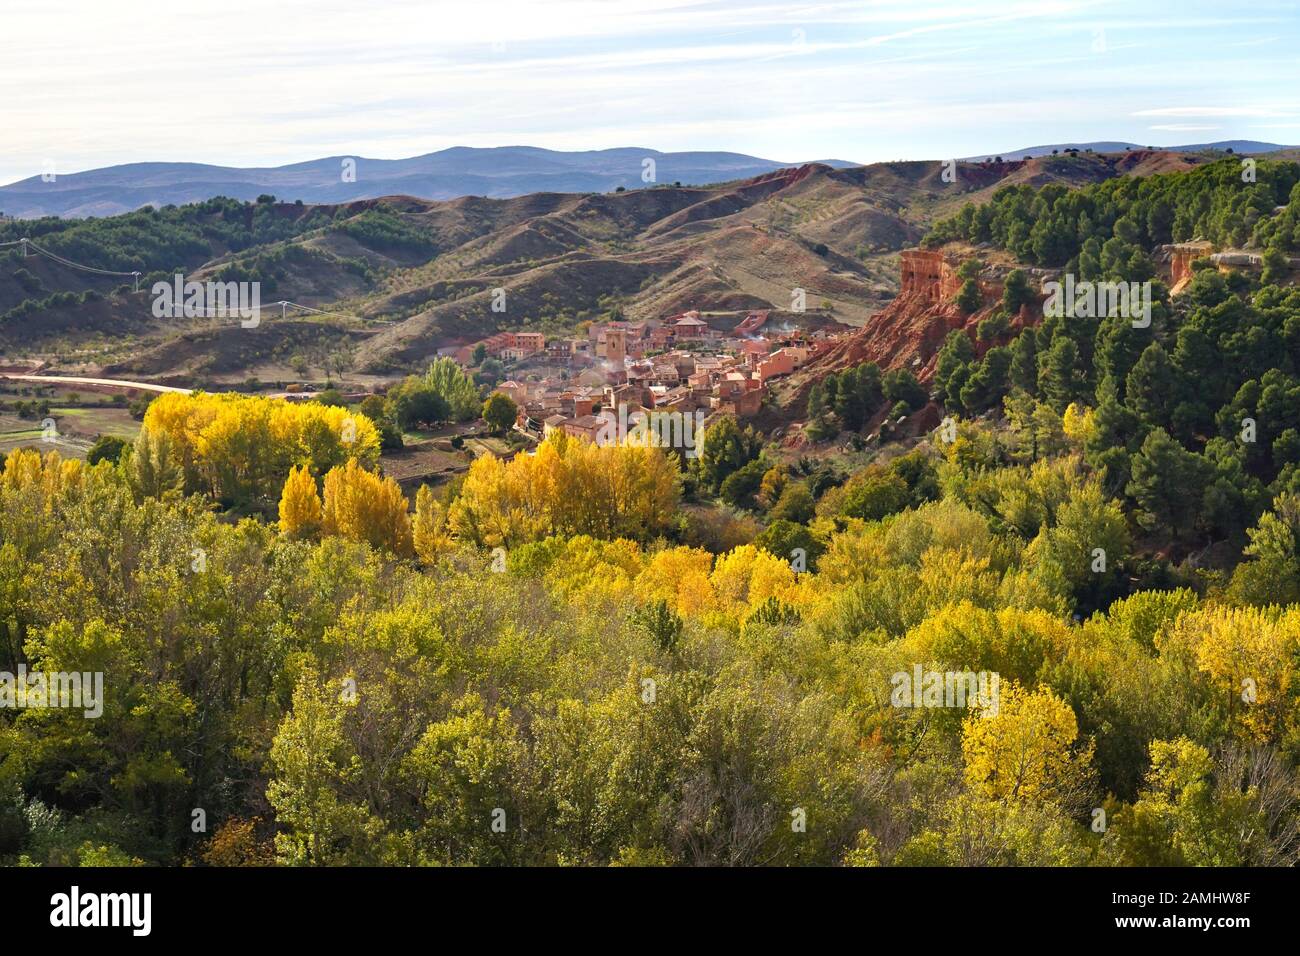 A view of a village built into the red rock surrounded by mountains & autumnal trees Stock Photo